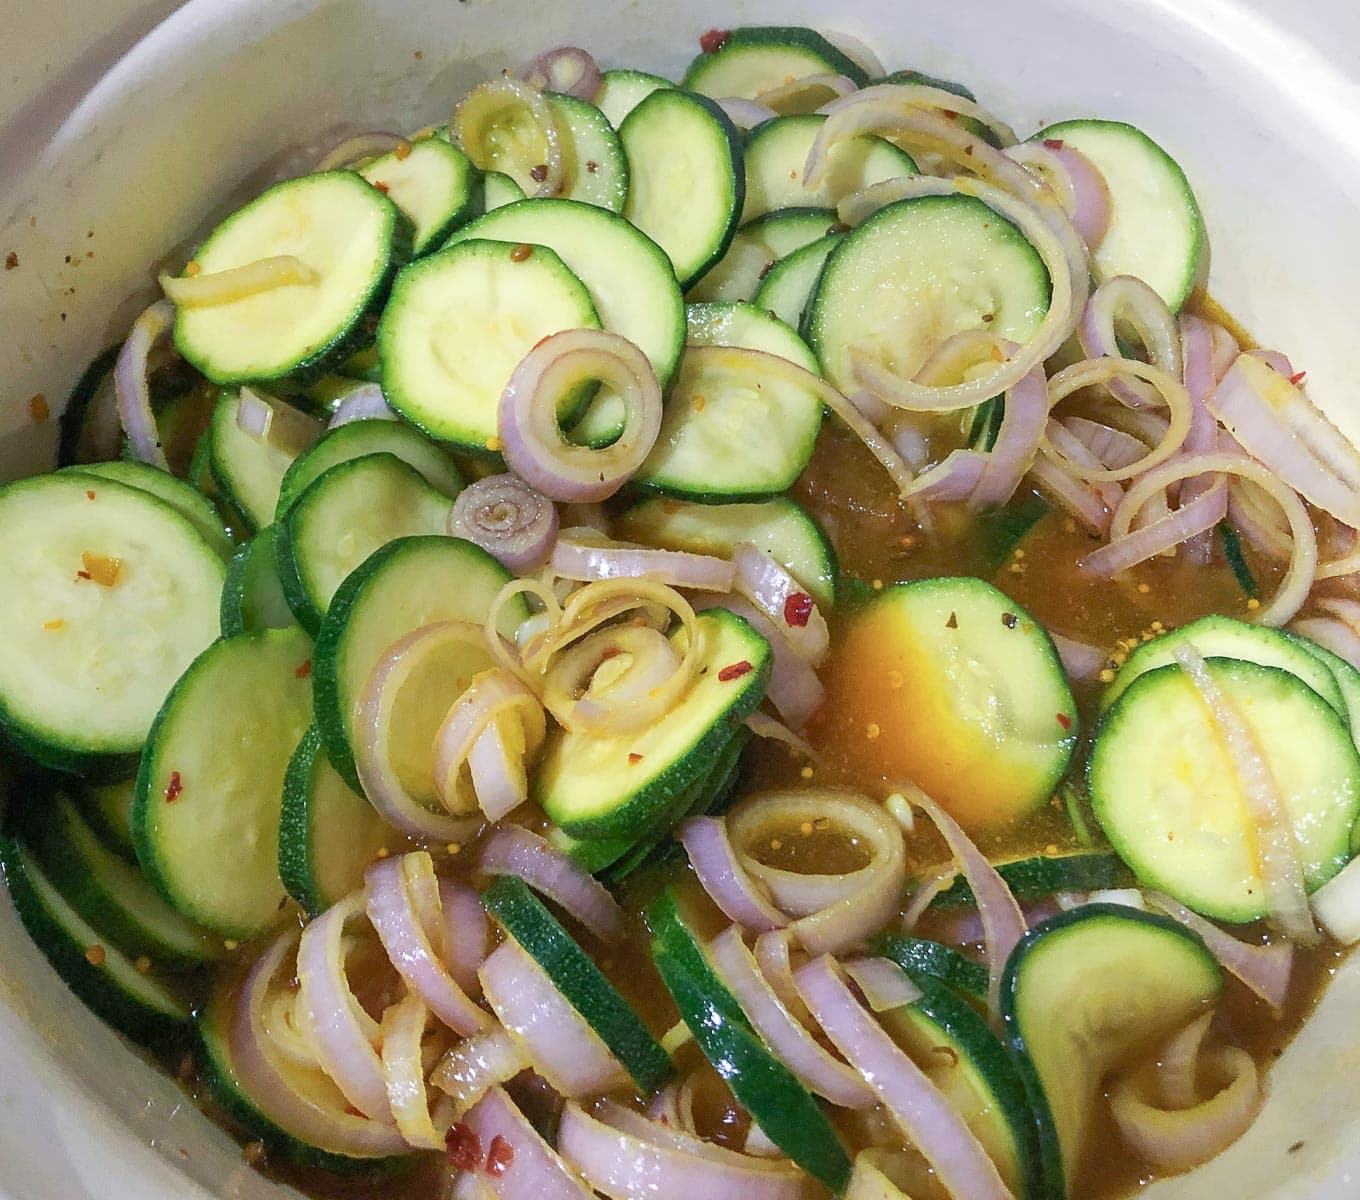 sliced courgettes and shallots in a mustard based vinegar to make a pickle.